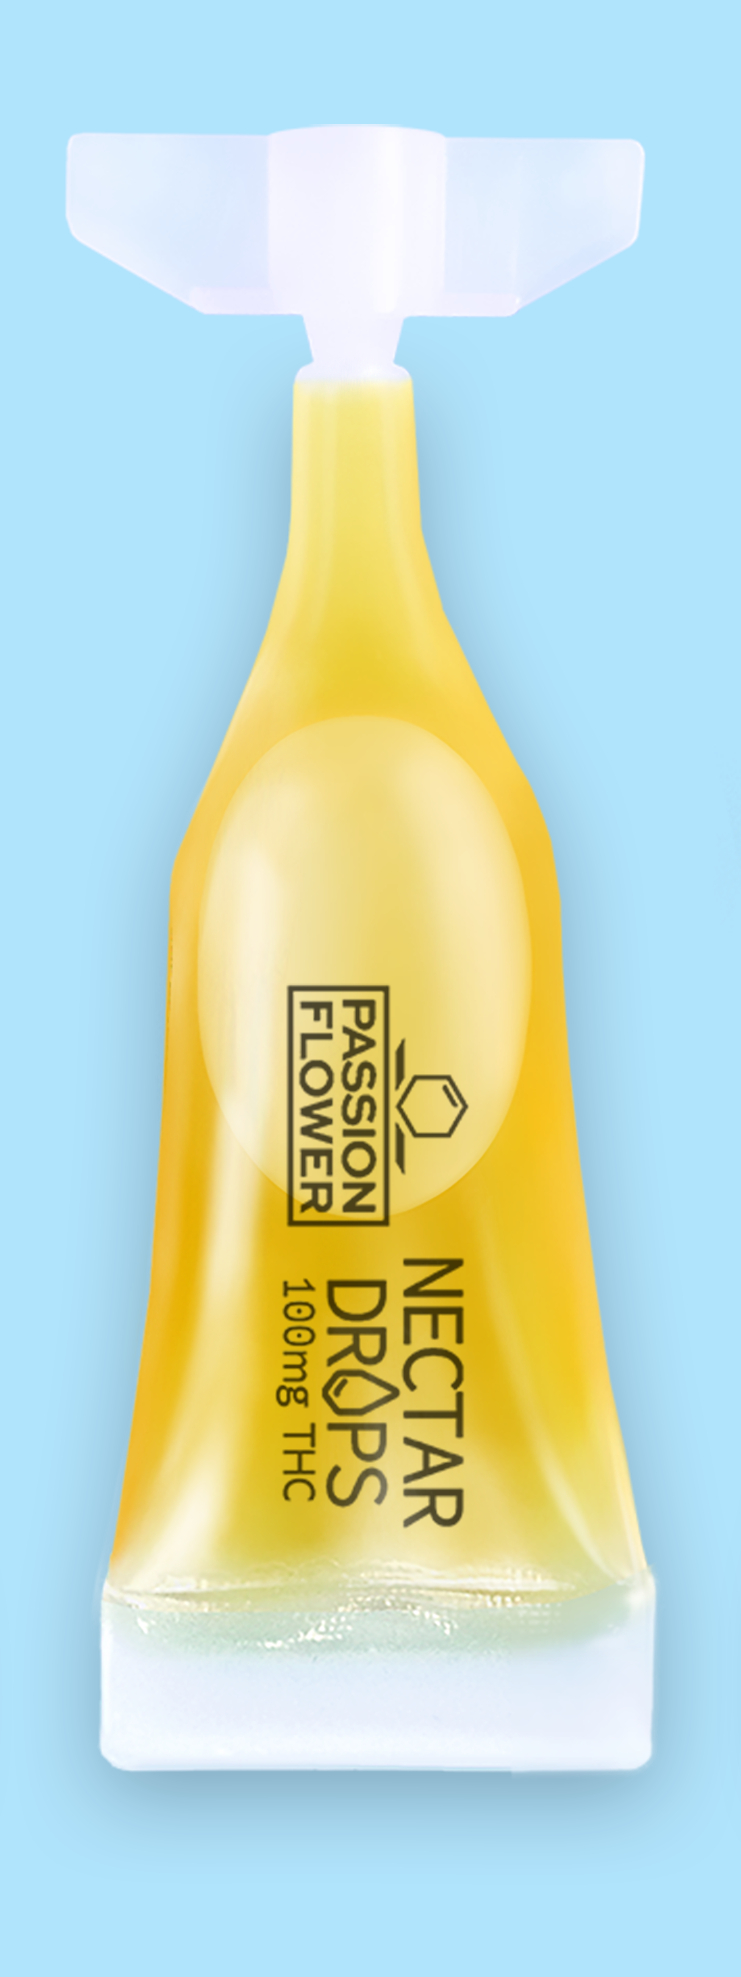 Passion Nectar Drops Live Resin Grapefruit